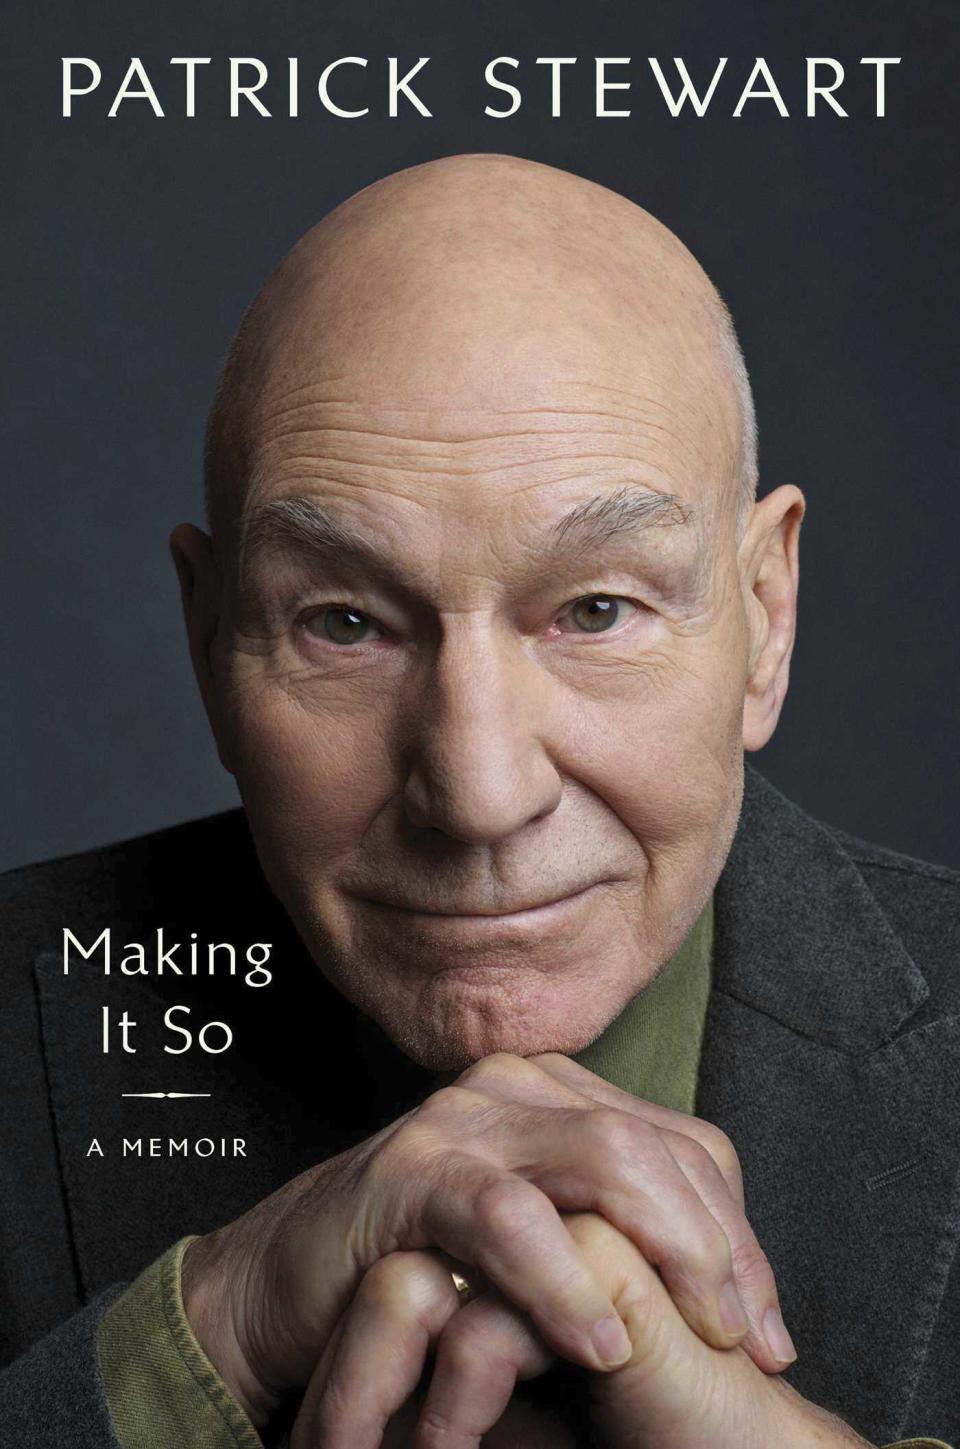 This cover image released by Gallery Books shows "Making It So" by Patrick Stewart. (Gallery Books via AP)